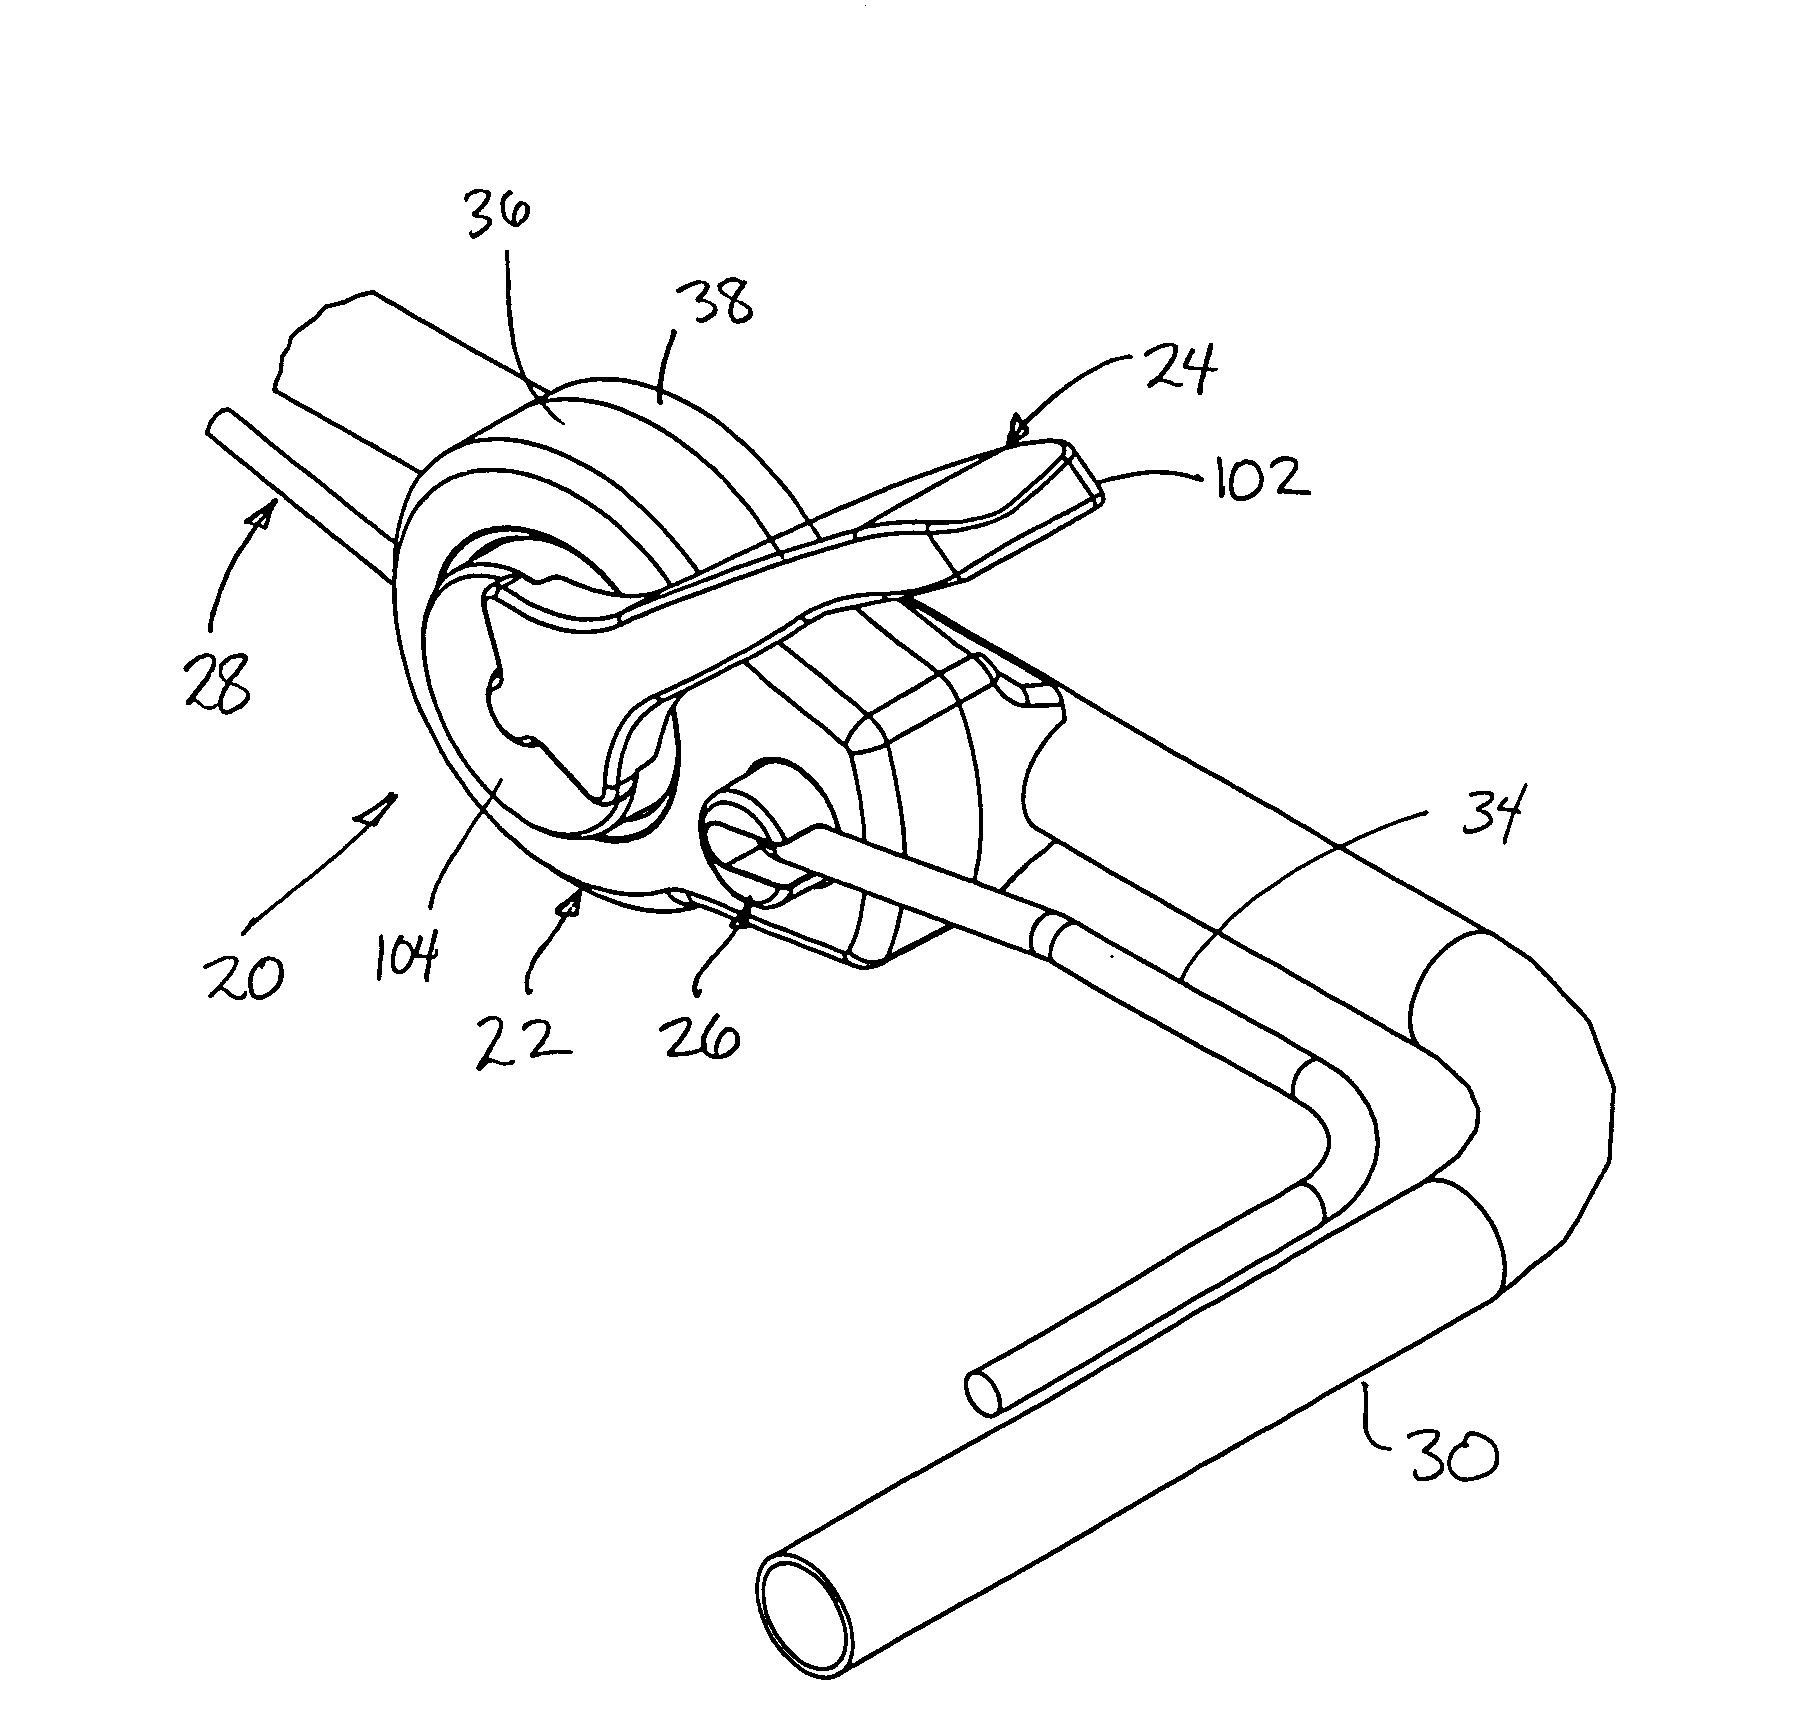 Apparatus for two-motion cable engagement